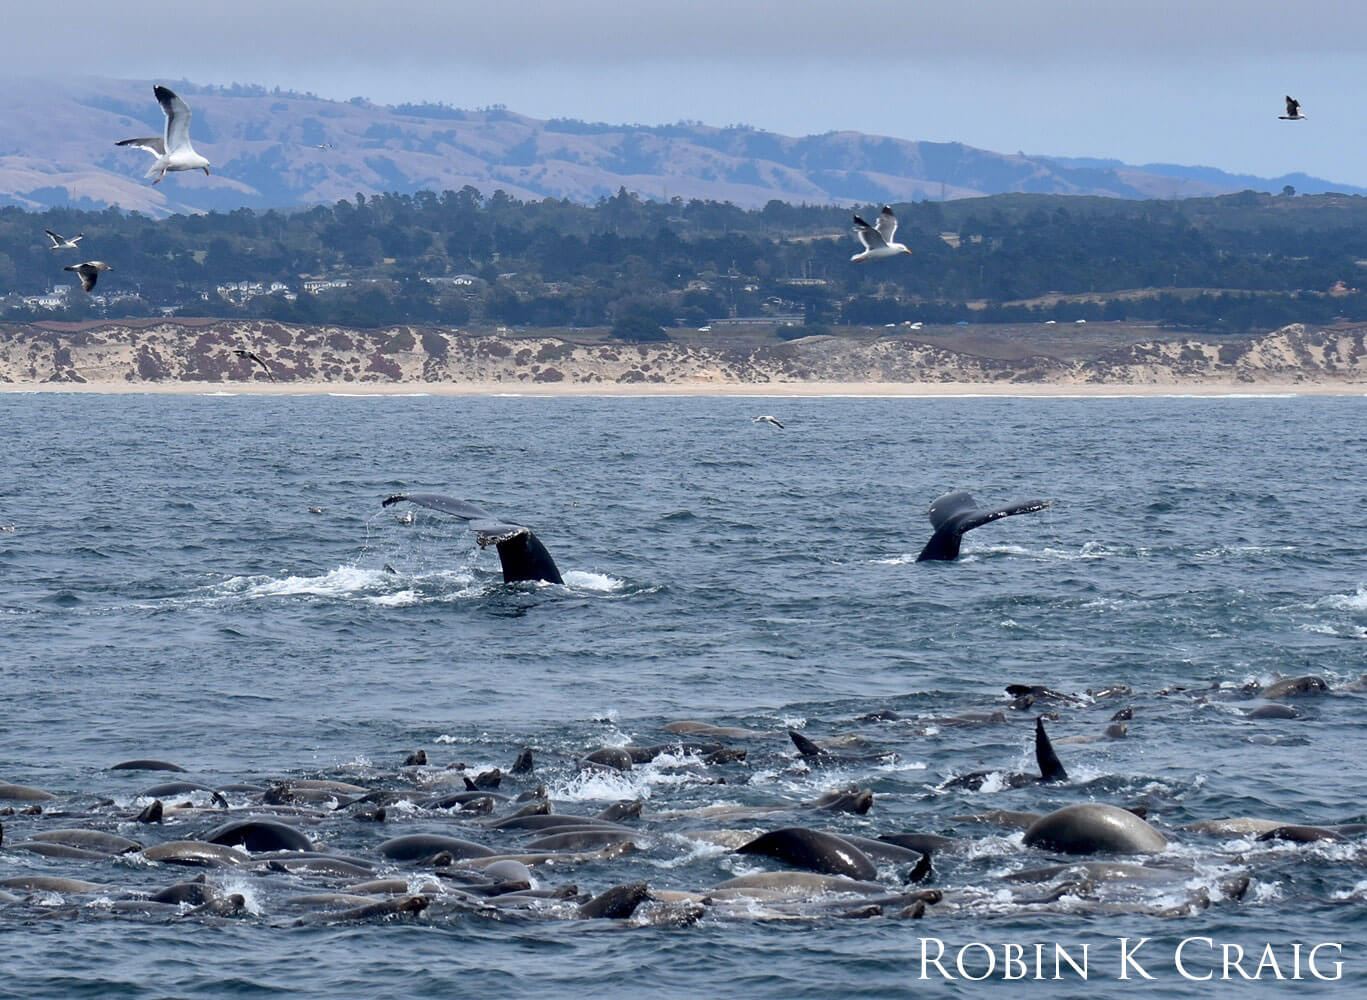 Two whale tails sticking out of the water and a pod of dolphins.